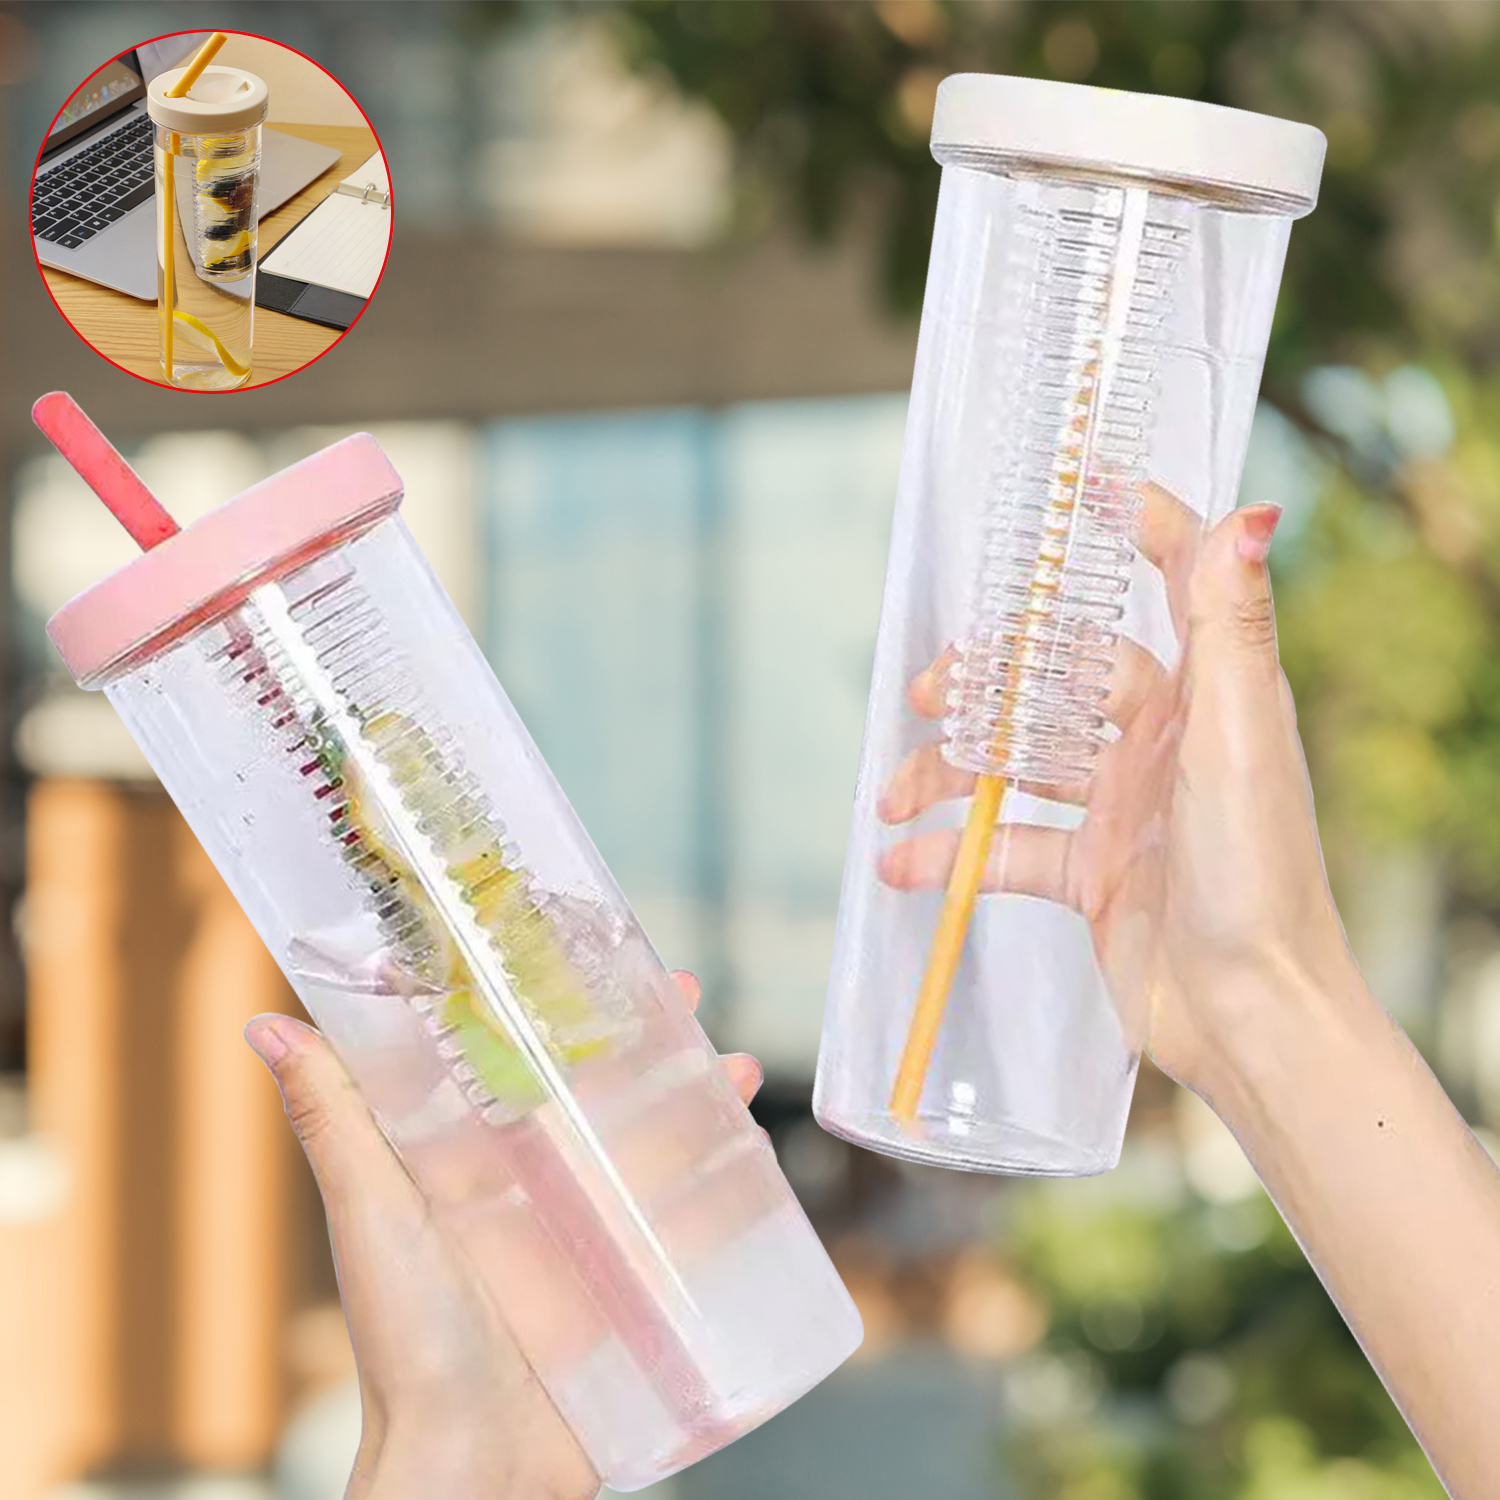 Fruit Infuser Water Bottle with Straw 700ml Large Capacity Foldable Water Bottle